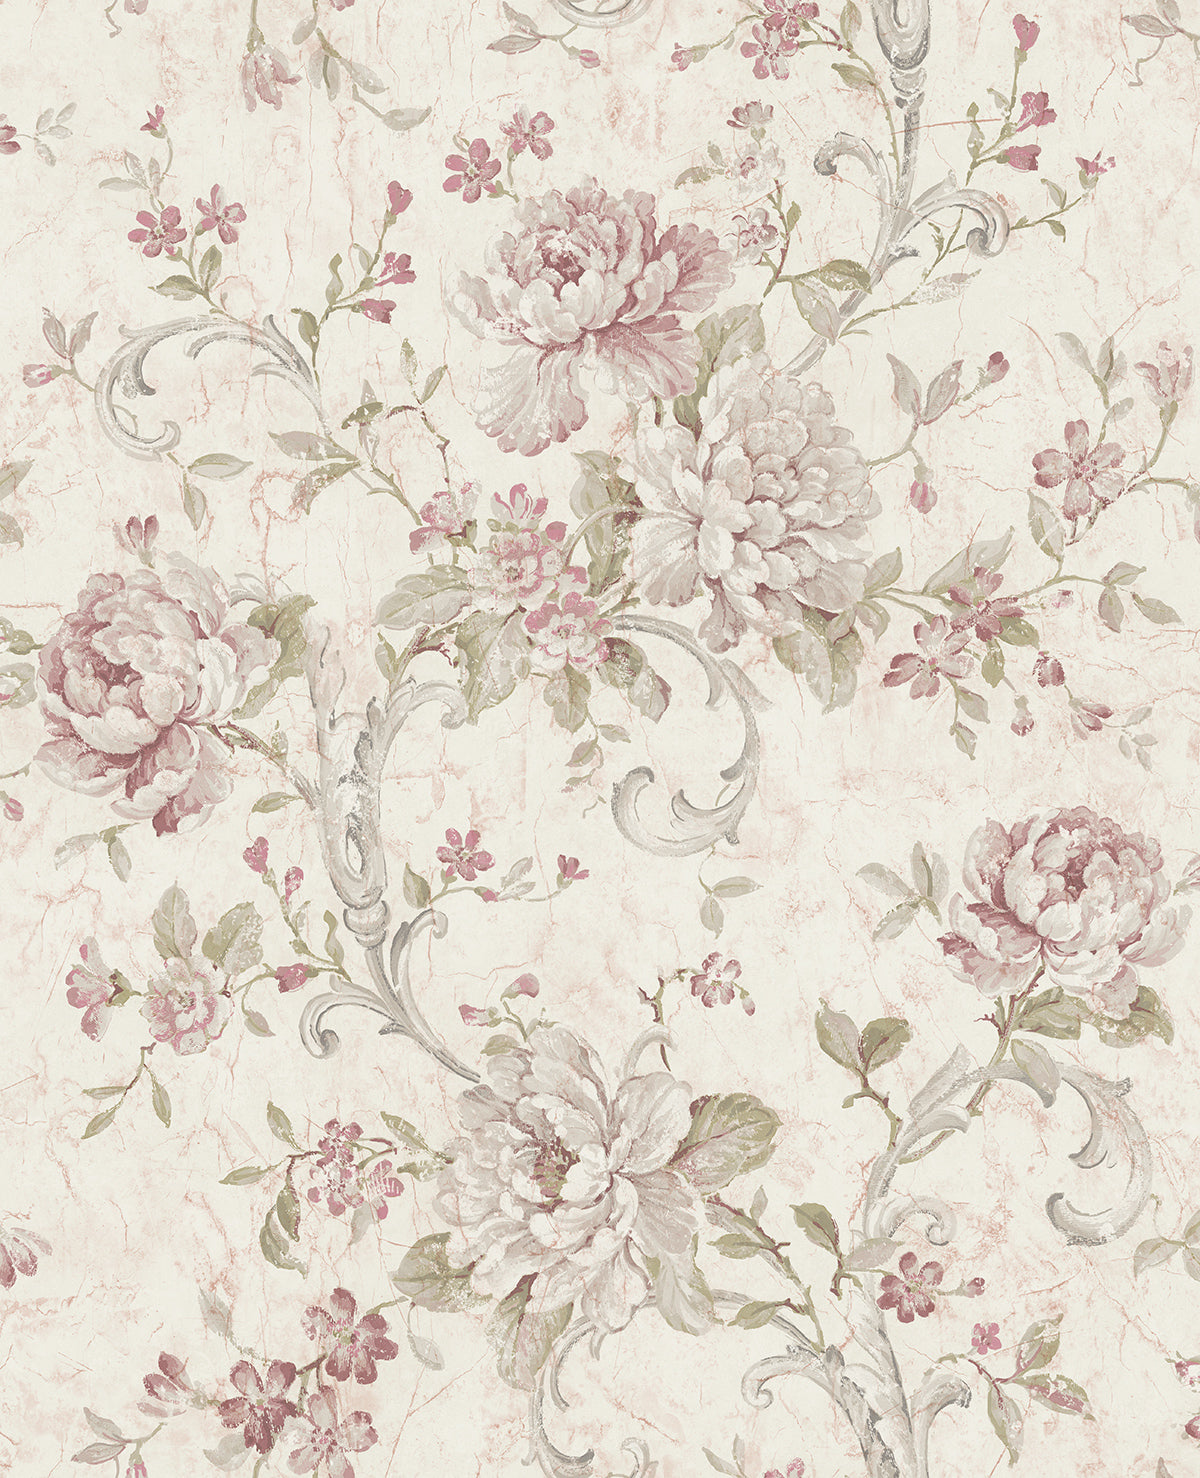 Shop Sample Antiqued Rose Wallpaper in Dusty Mauve from the Vintage Home 2  Collection